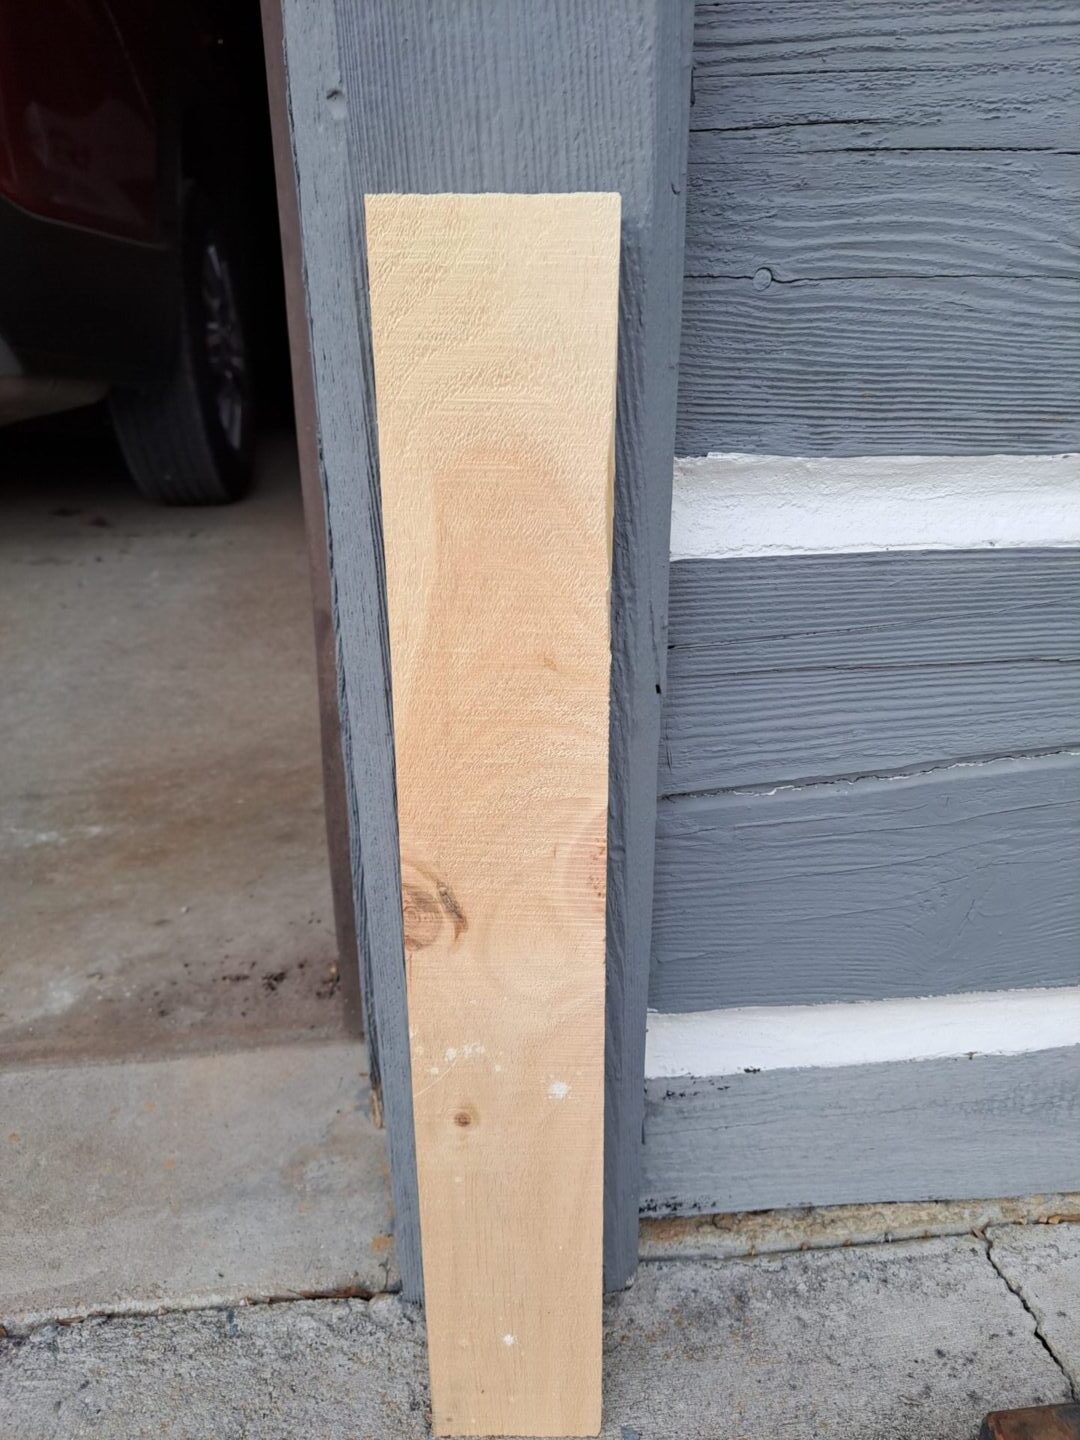 An outside of a door with a plank of wood kept outside with a gray color wall